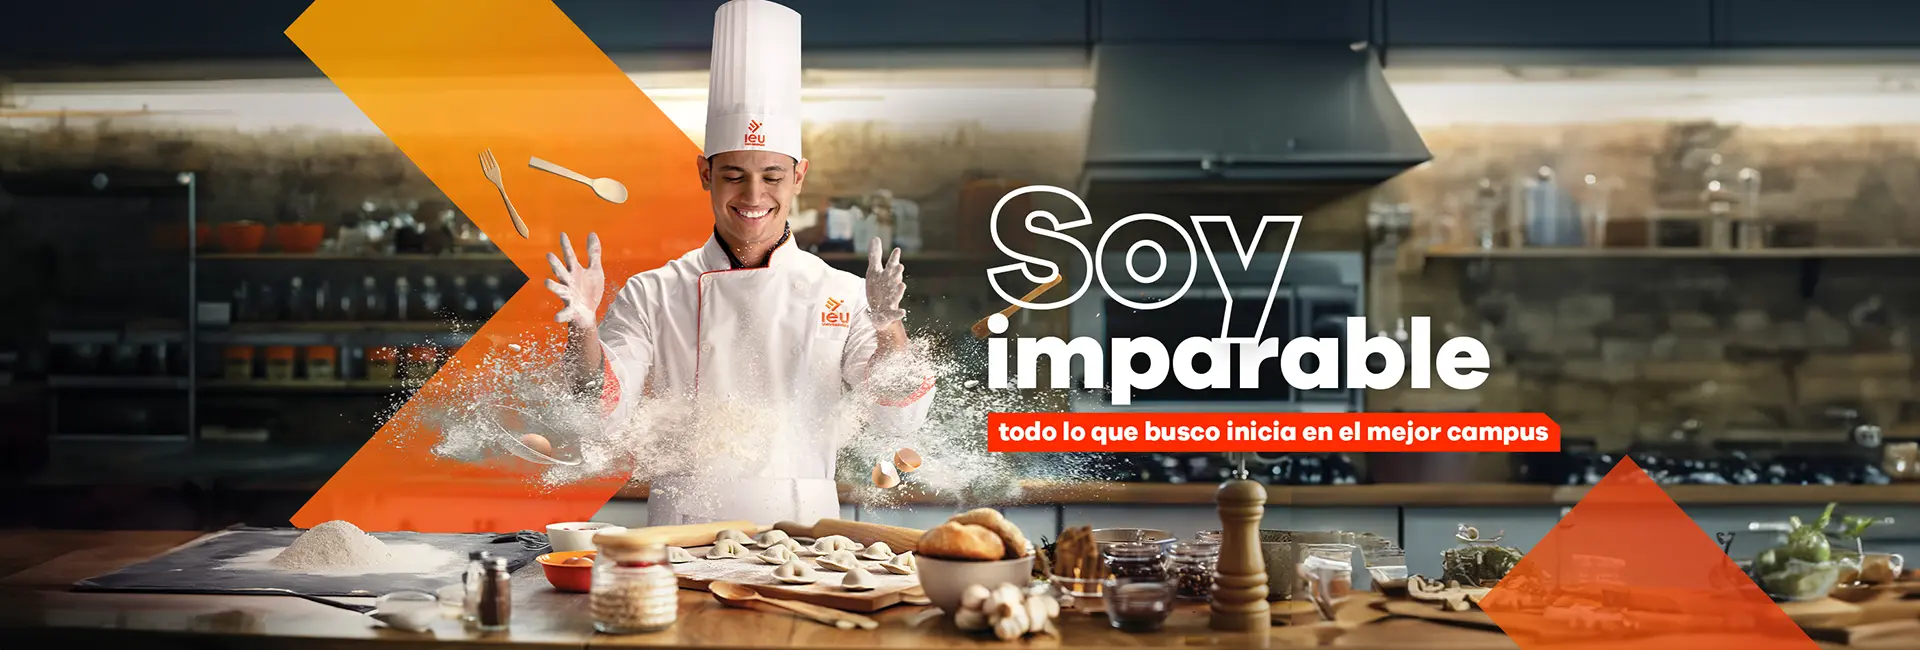 Soy Imparable